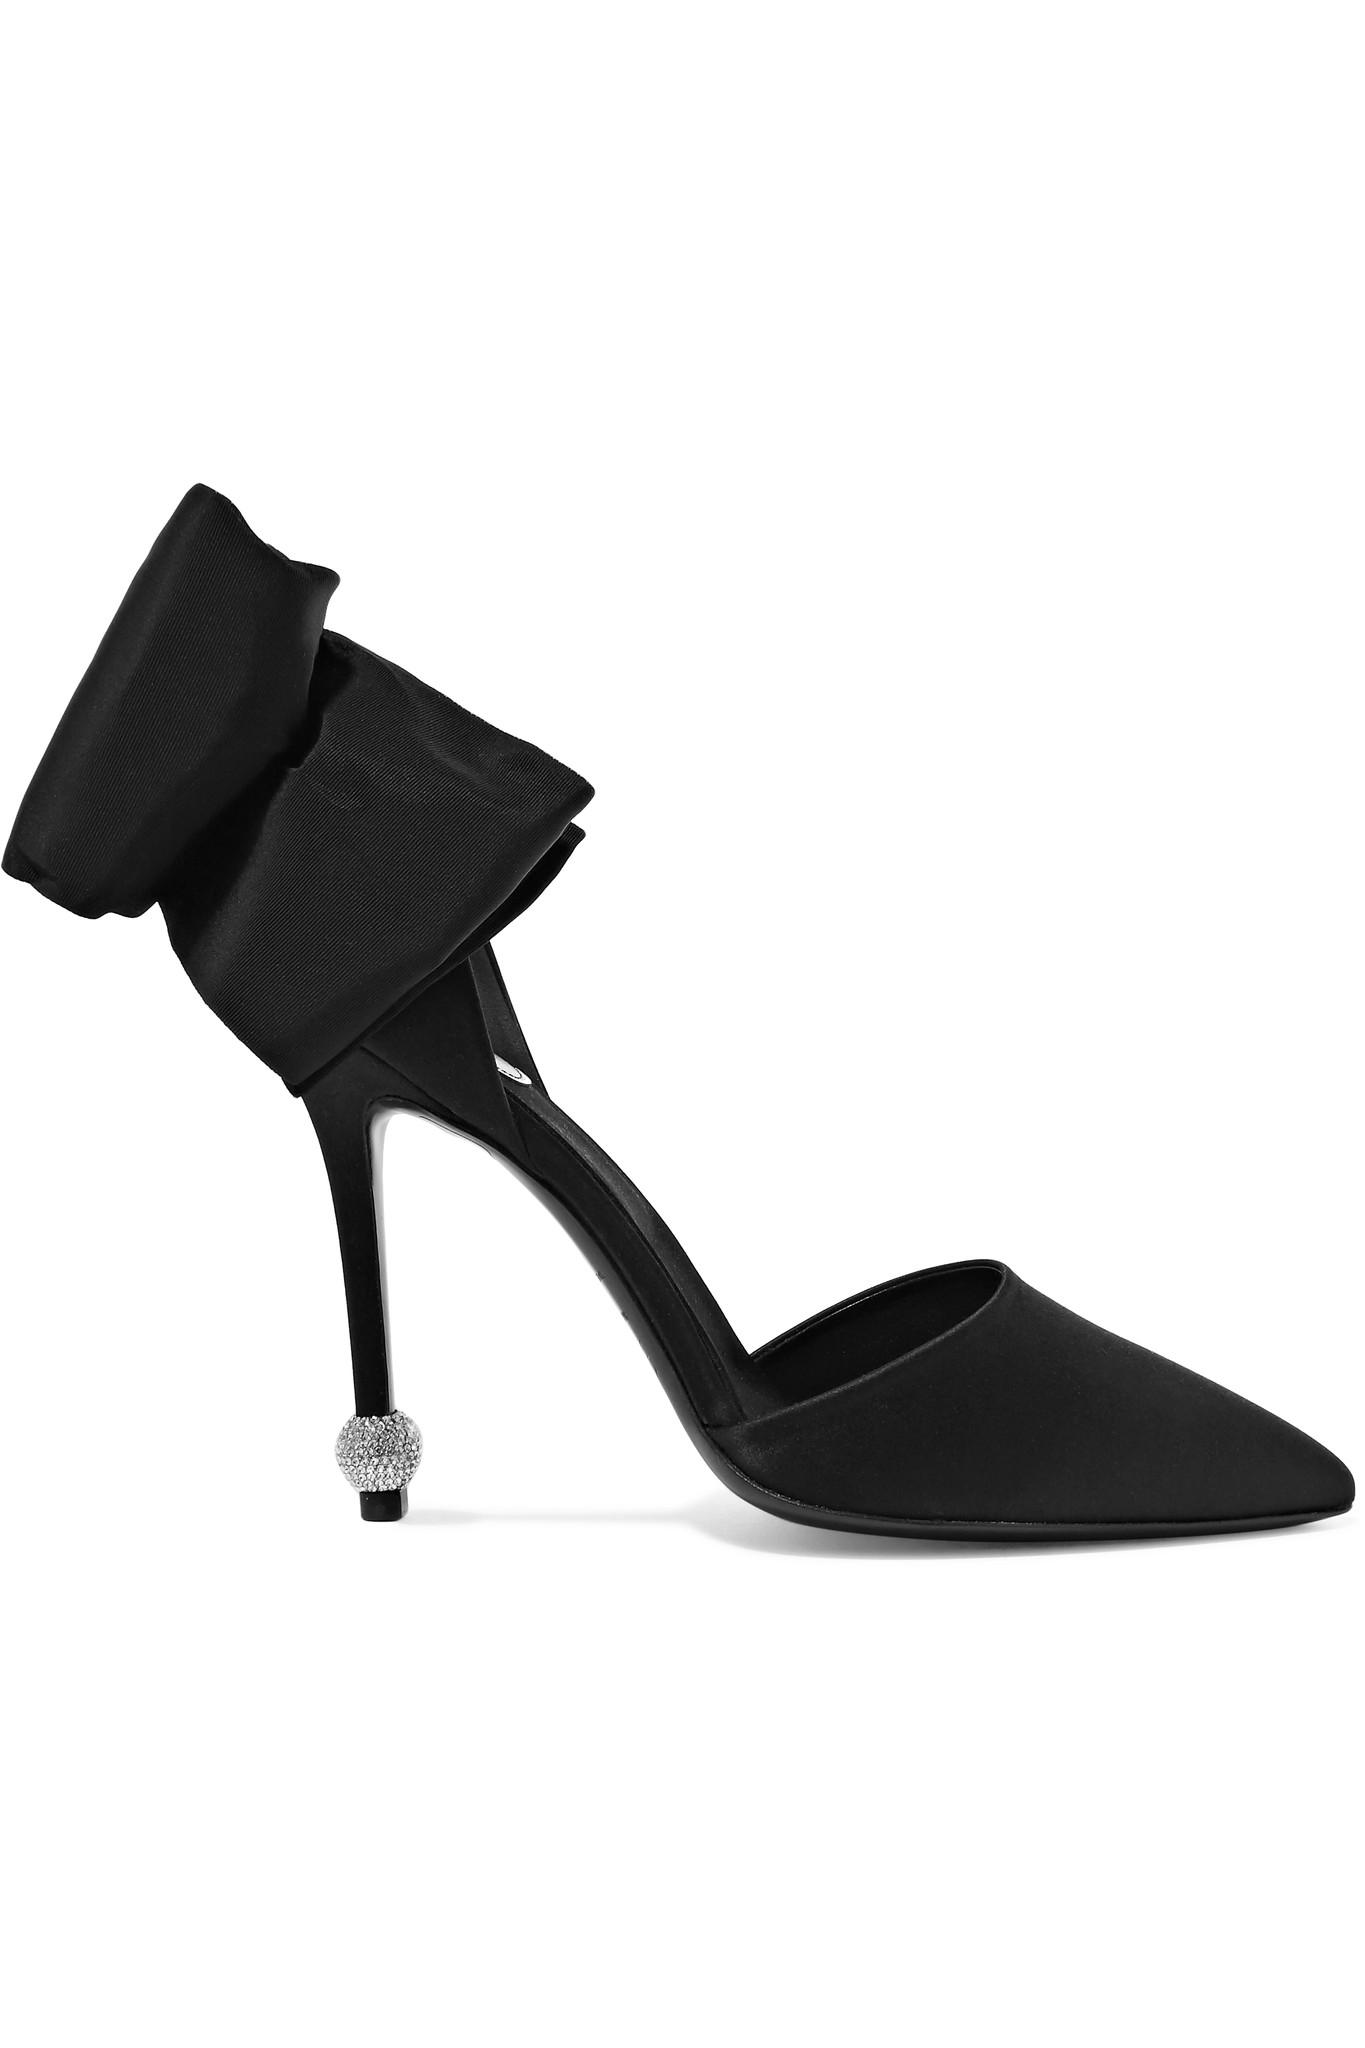 Roger Vivier Dorsay Papillon Bow And Crystal-embellished Satin Pumps in Black - Lyst